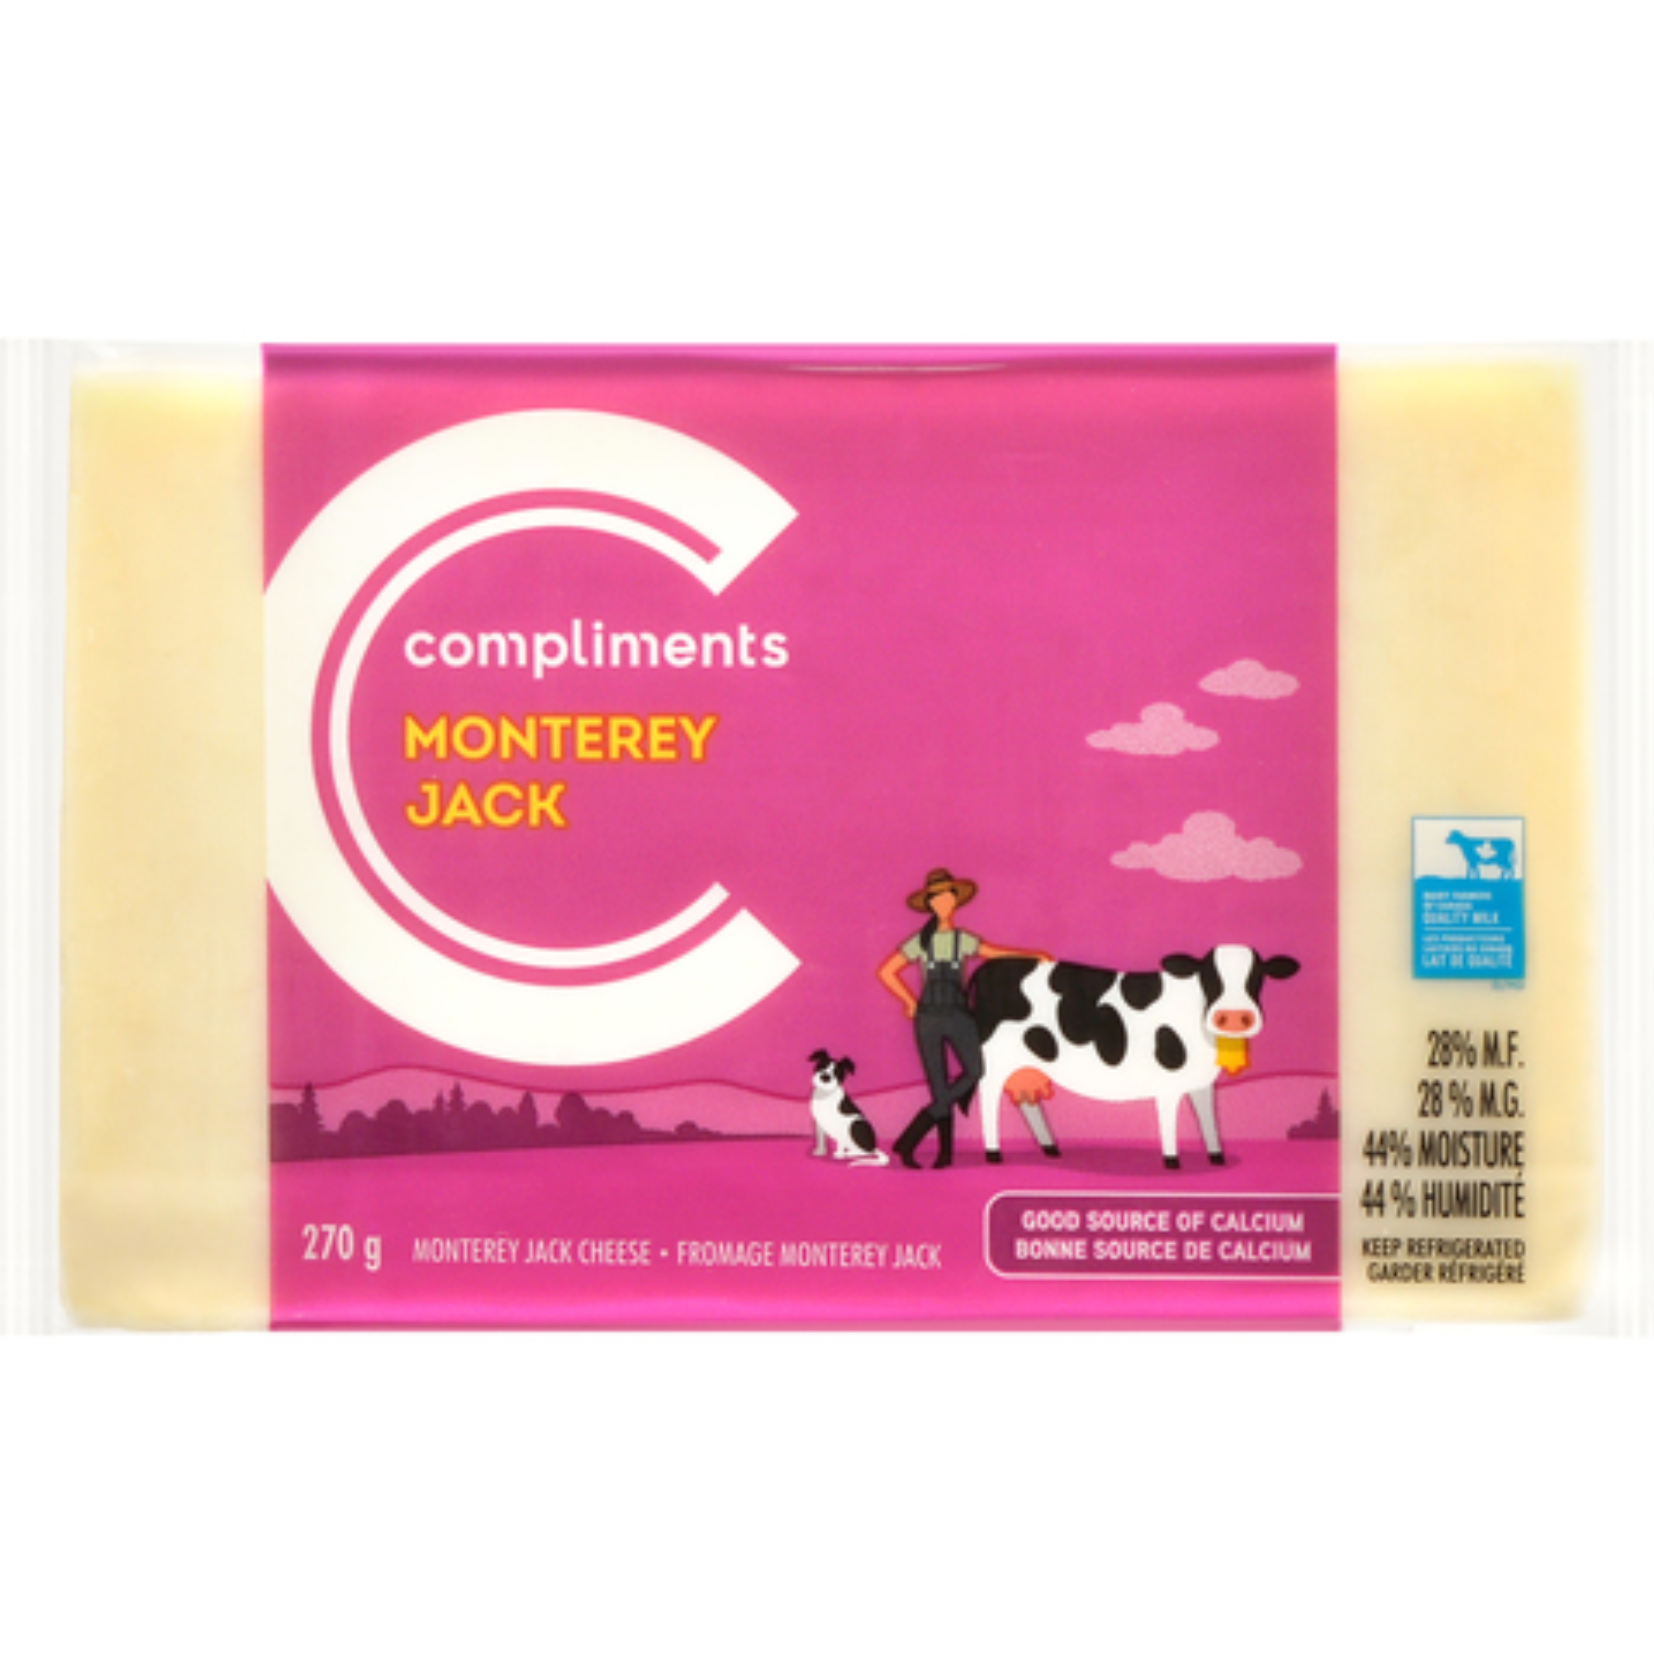 Compliments Monterey Jack Cheese 270g